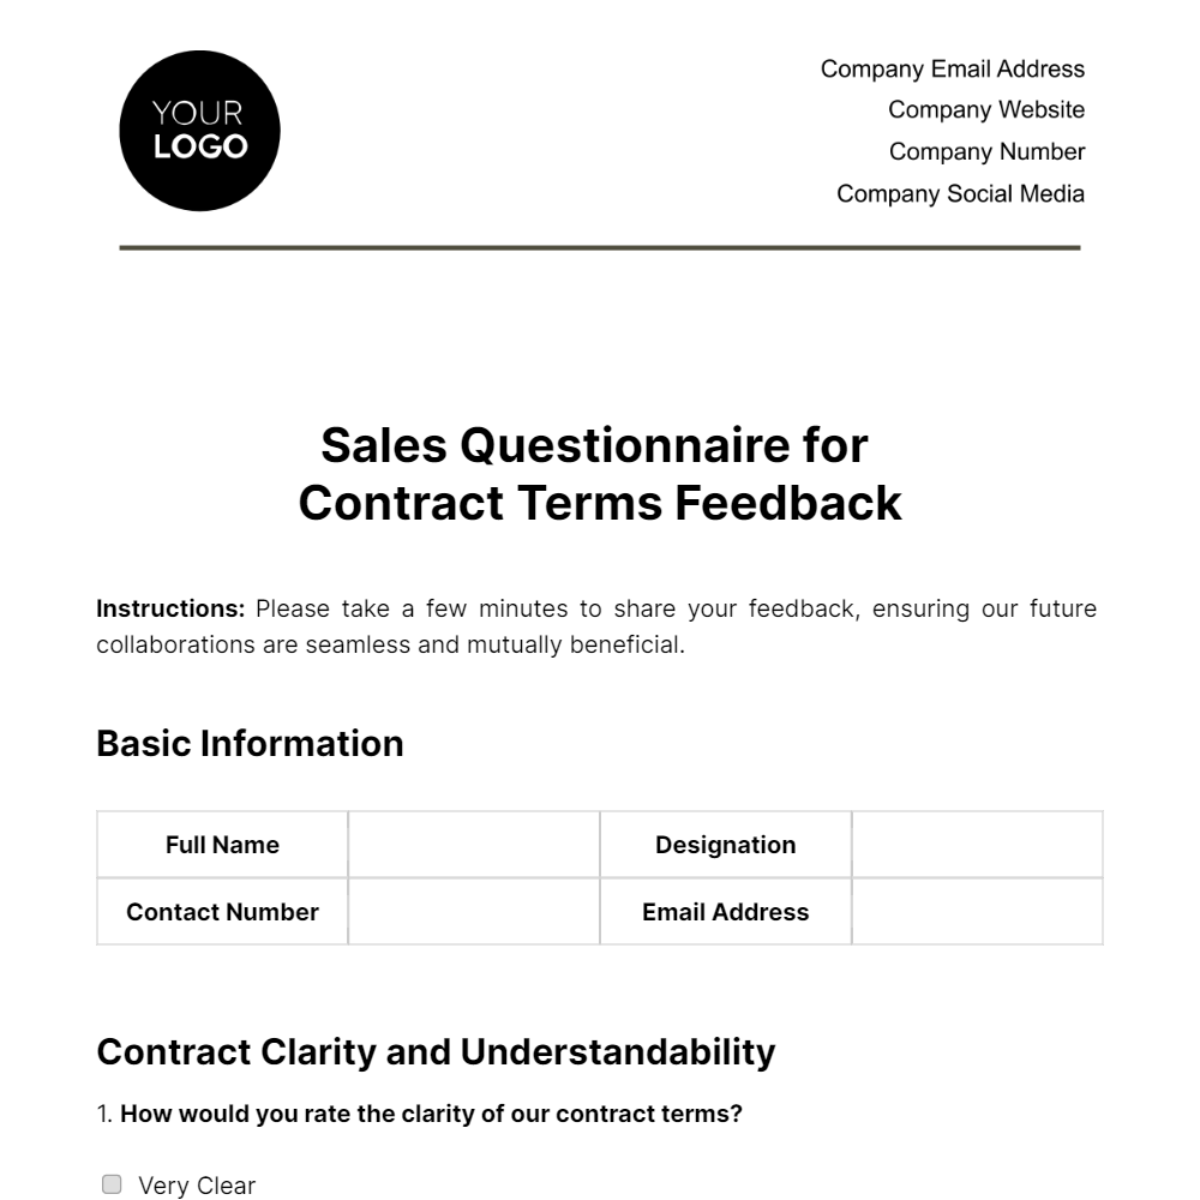 Sales Questionnaire for Contract Terms Feedback Template